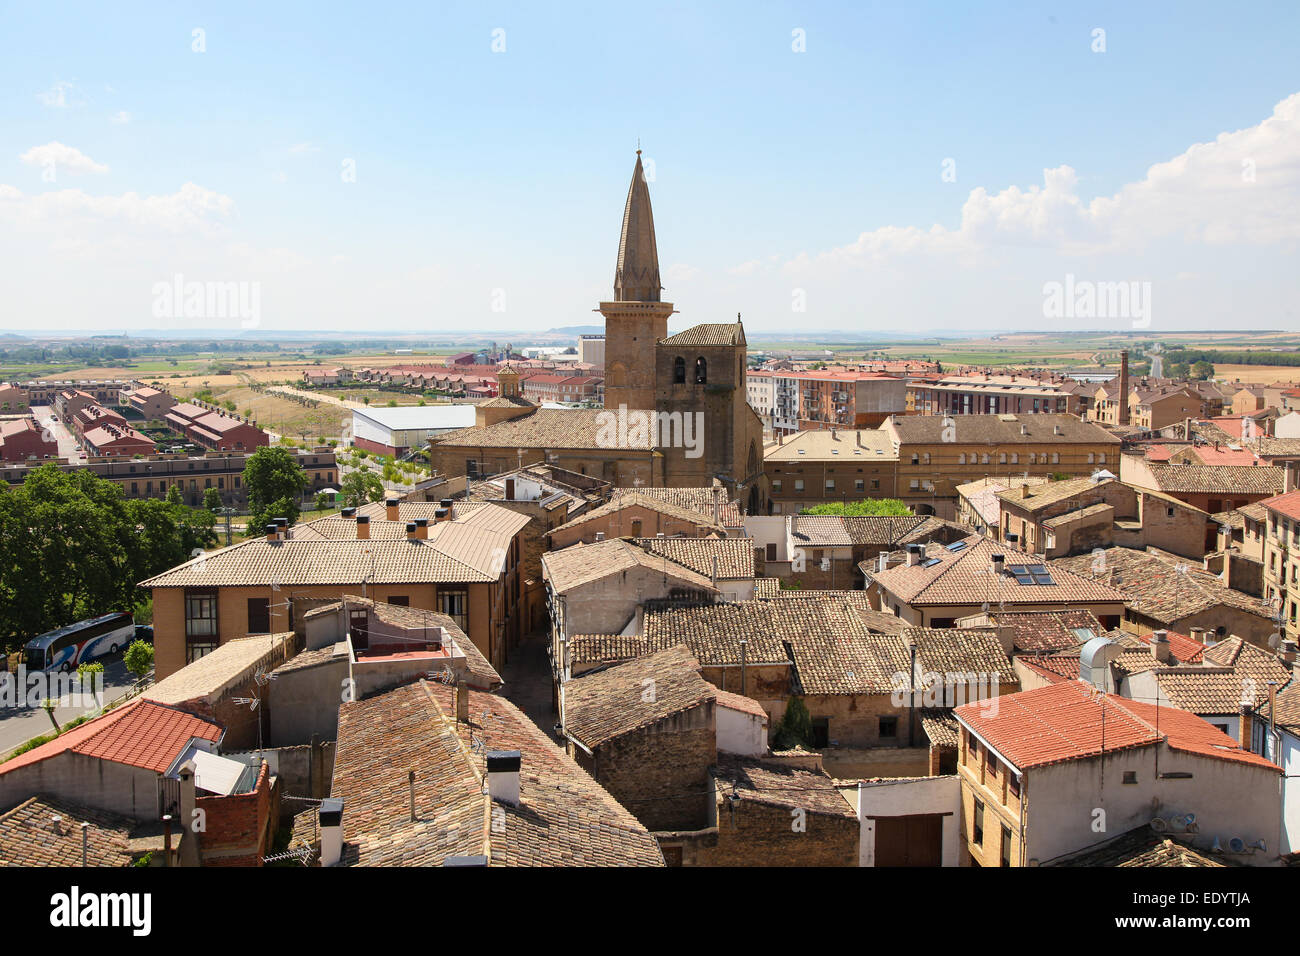 View from the medieval fortifications in Olite, a town in Navarre, Northern Spain. Stock Photo